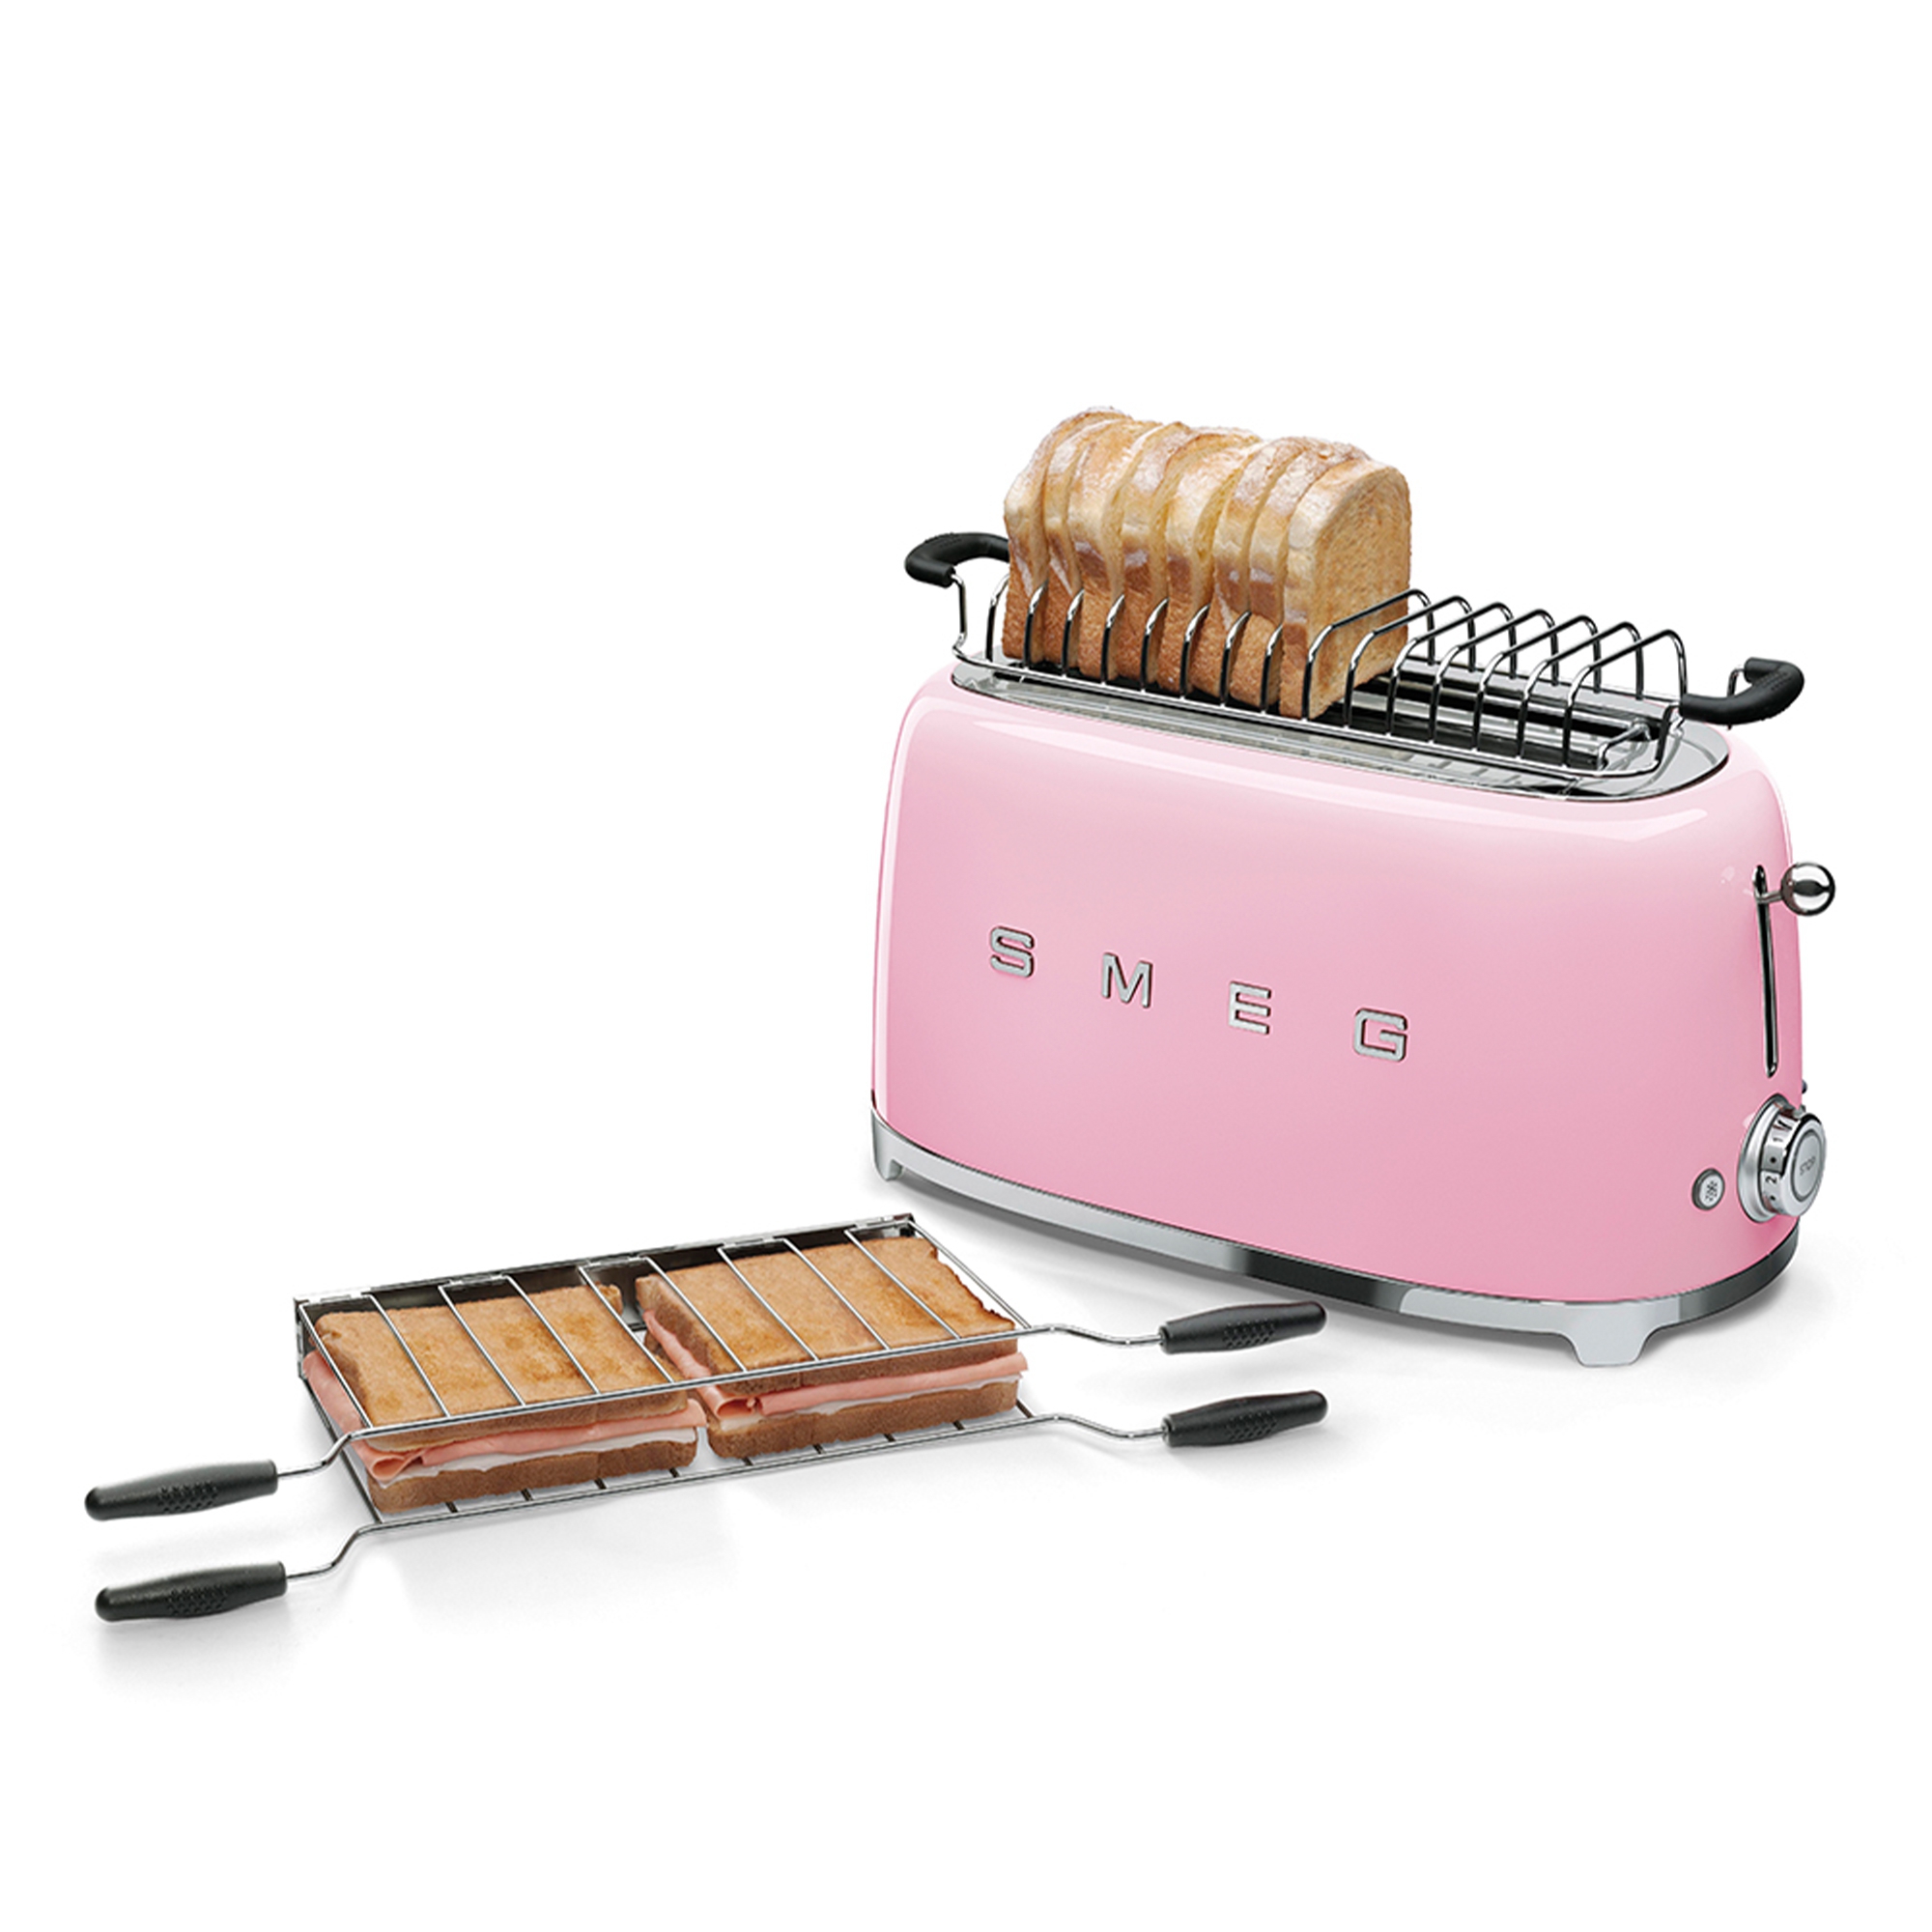 Smeg - 2-slot toaster long TSF02 - design line style The 50 ° years